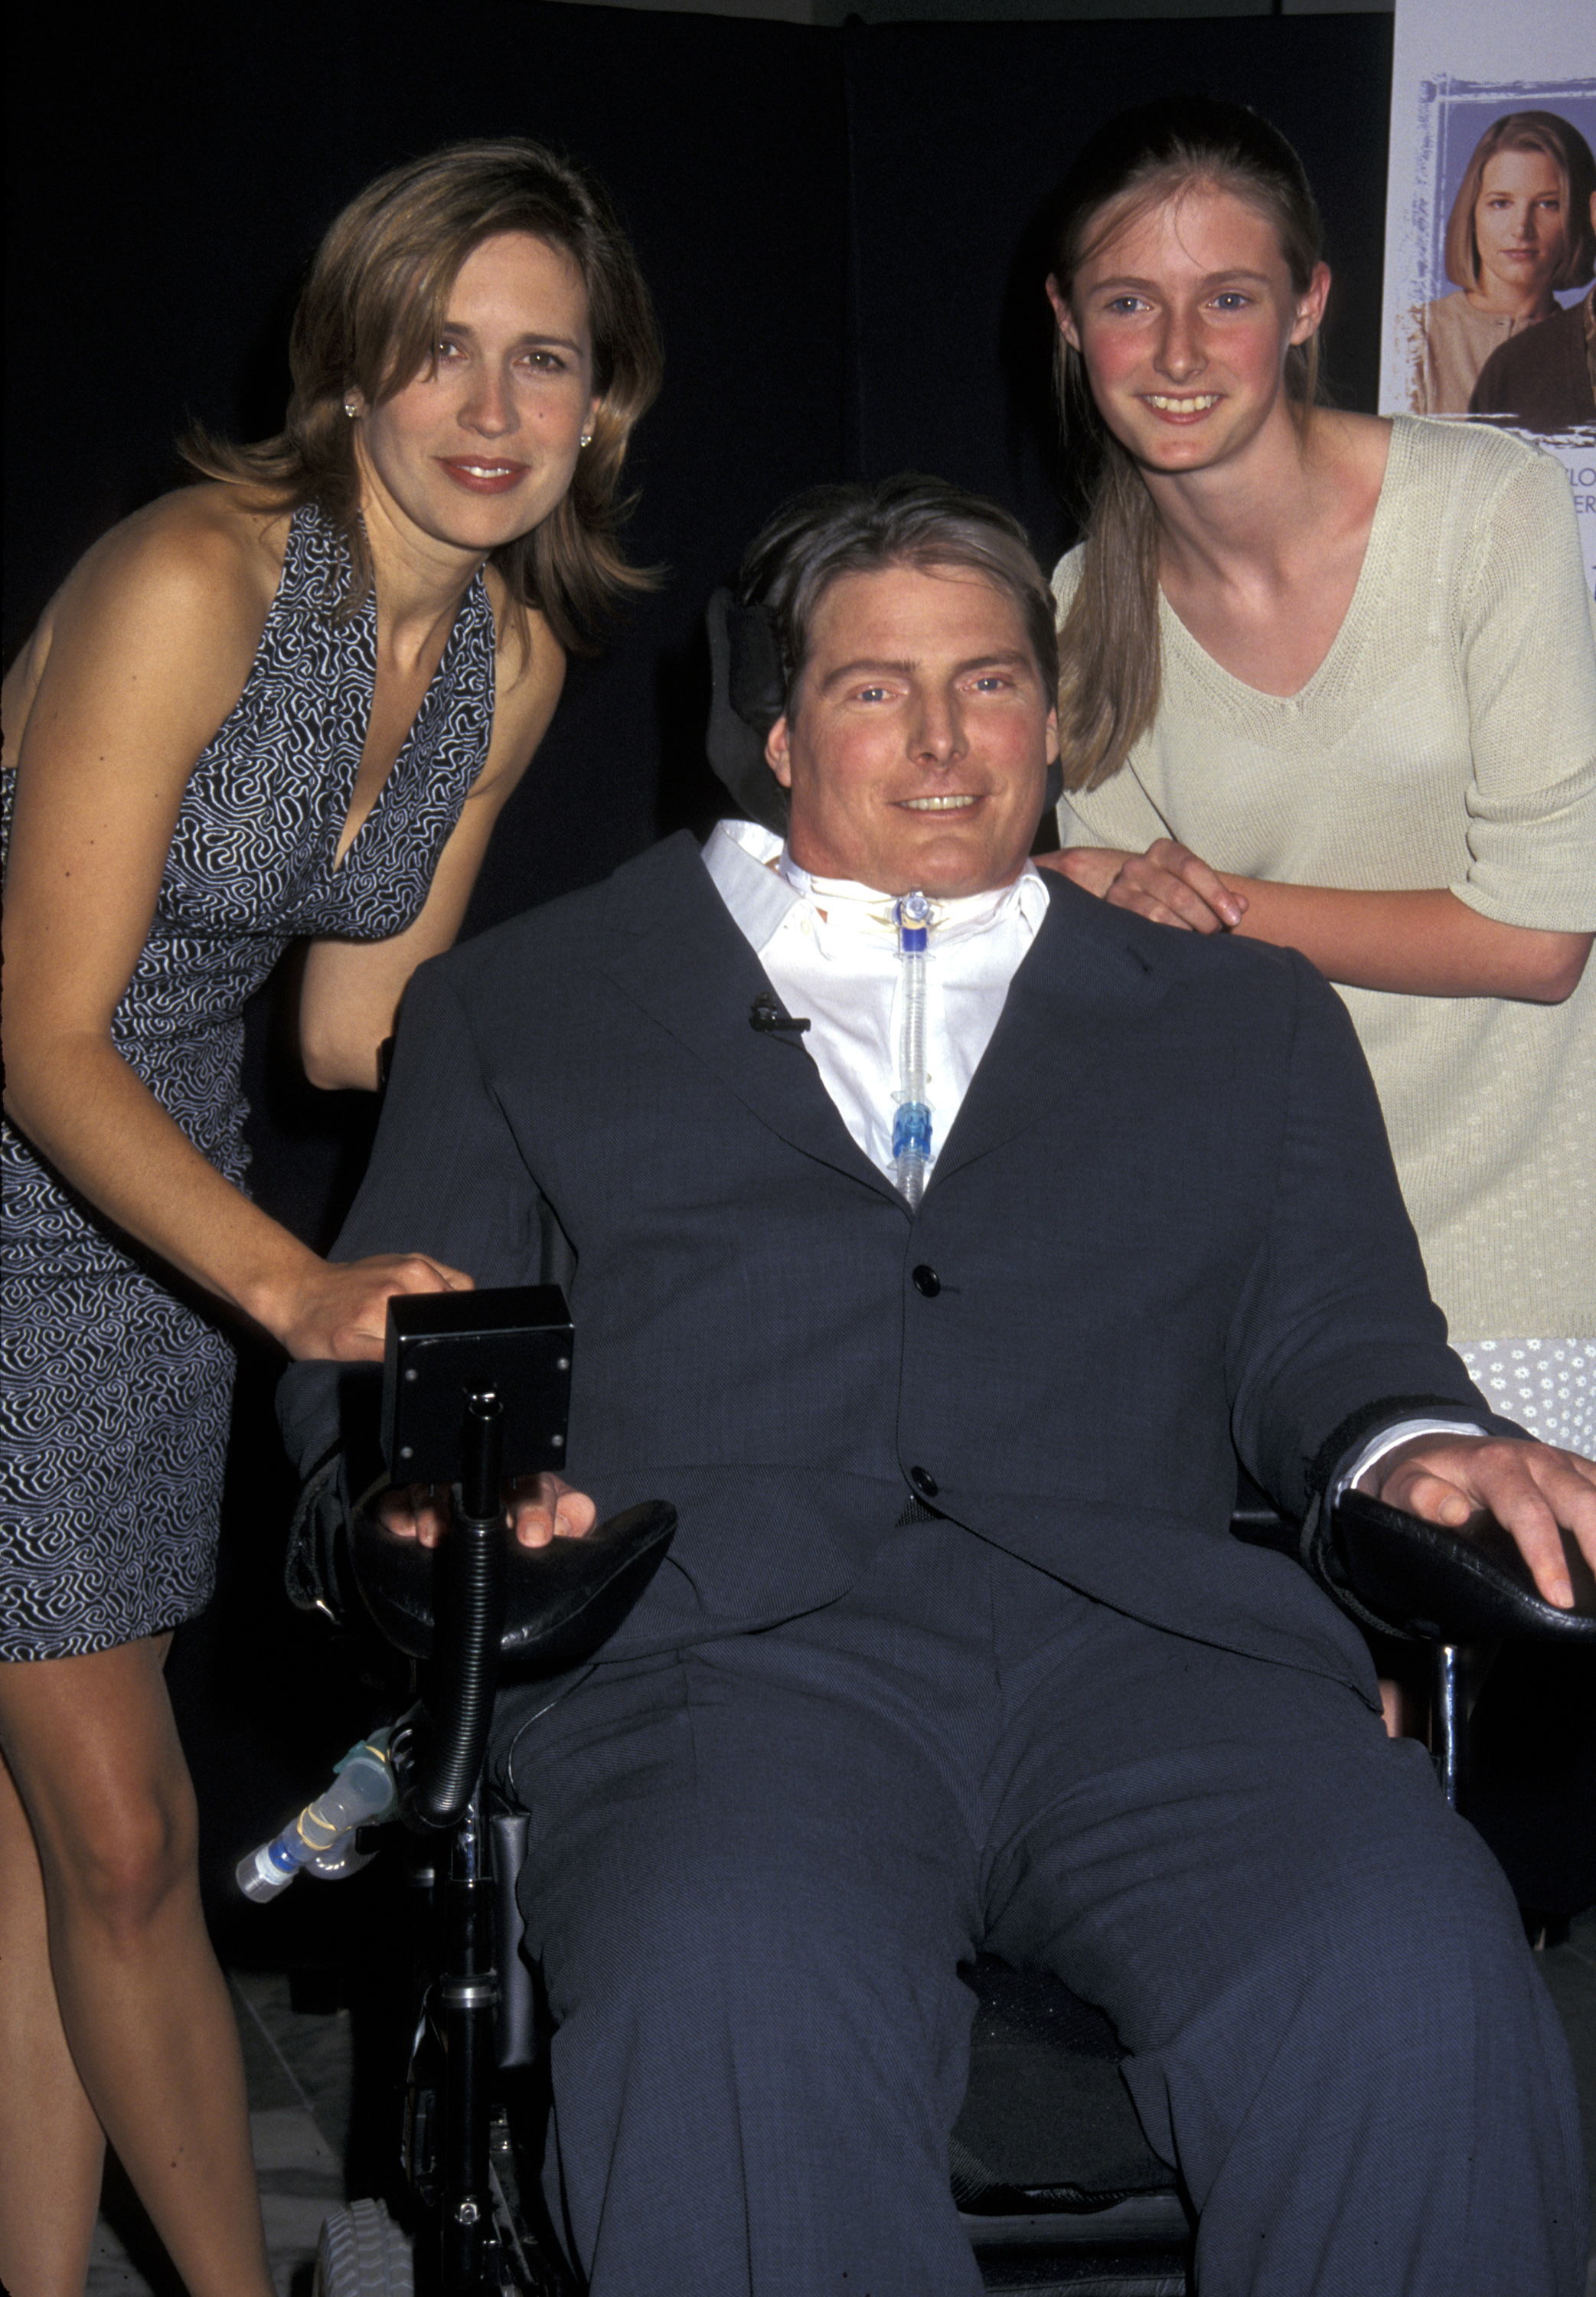 Dana Reeve, Christopher Reeve and his daughter Alexandra Reeve at the screening of "In the Gloaming" on April 7, 1997. | Source: Getty Images